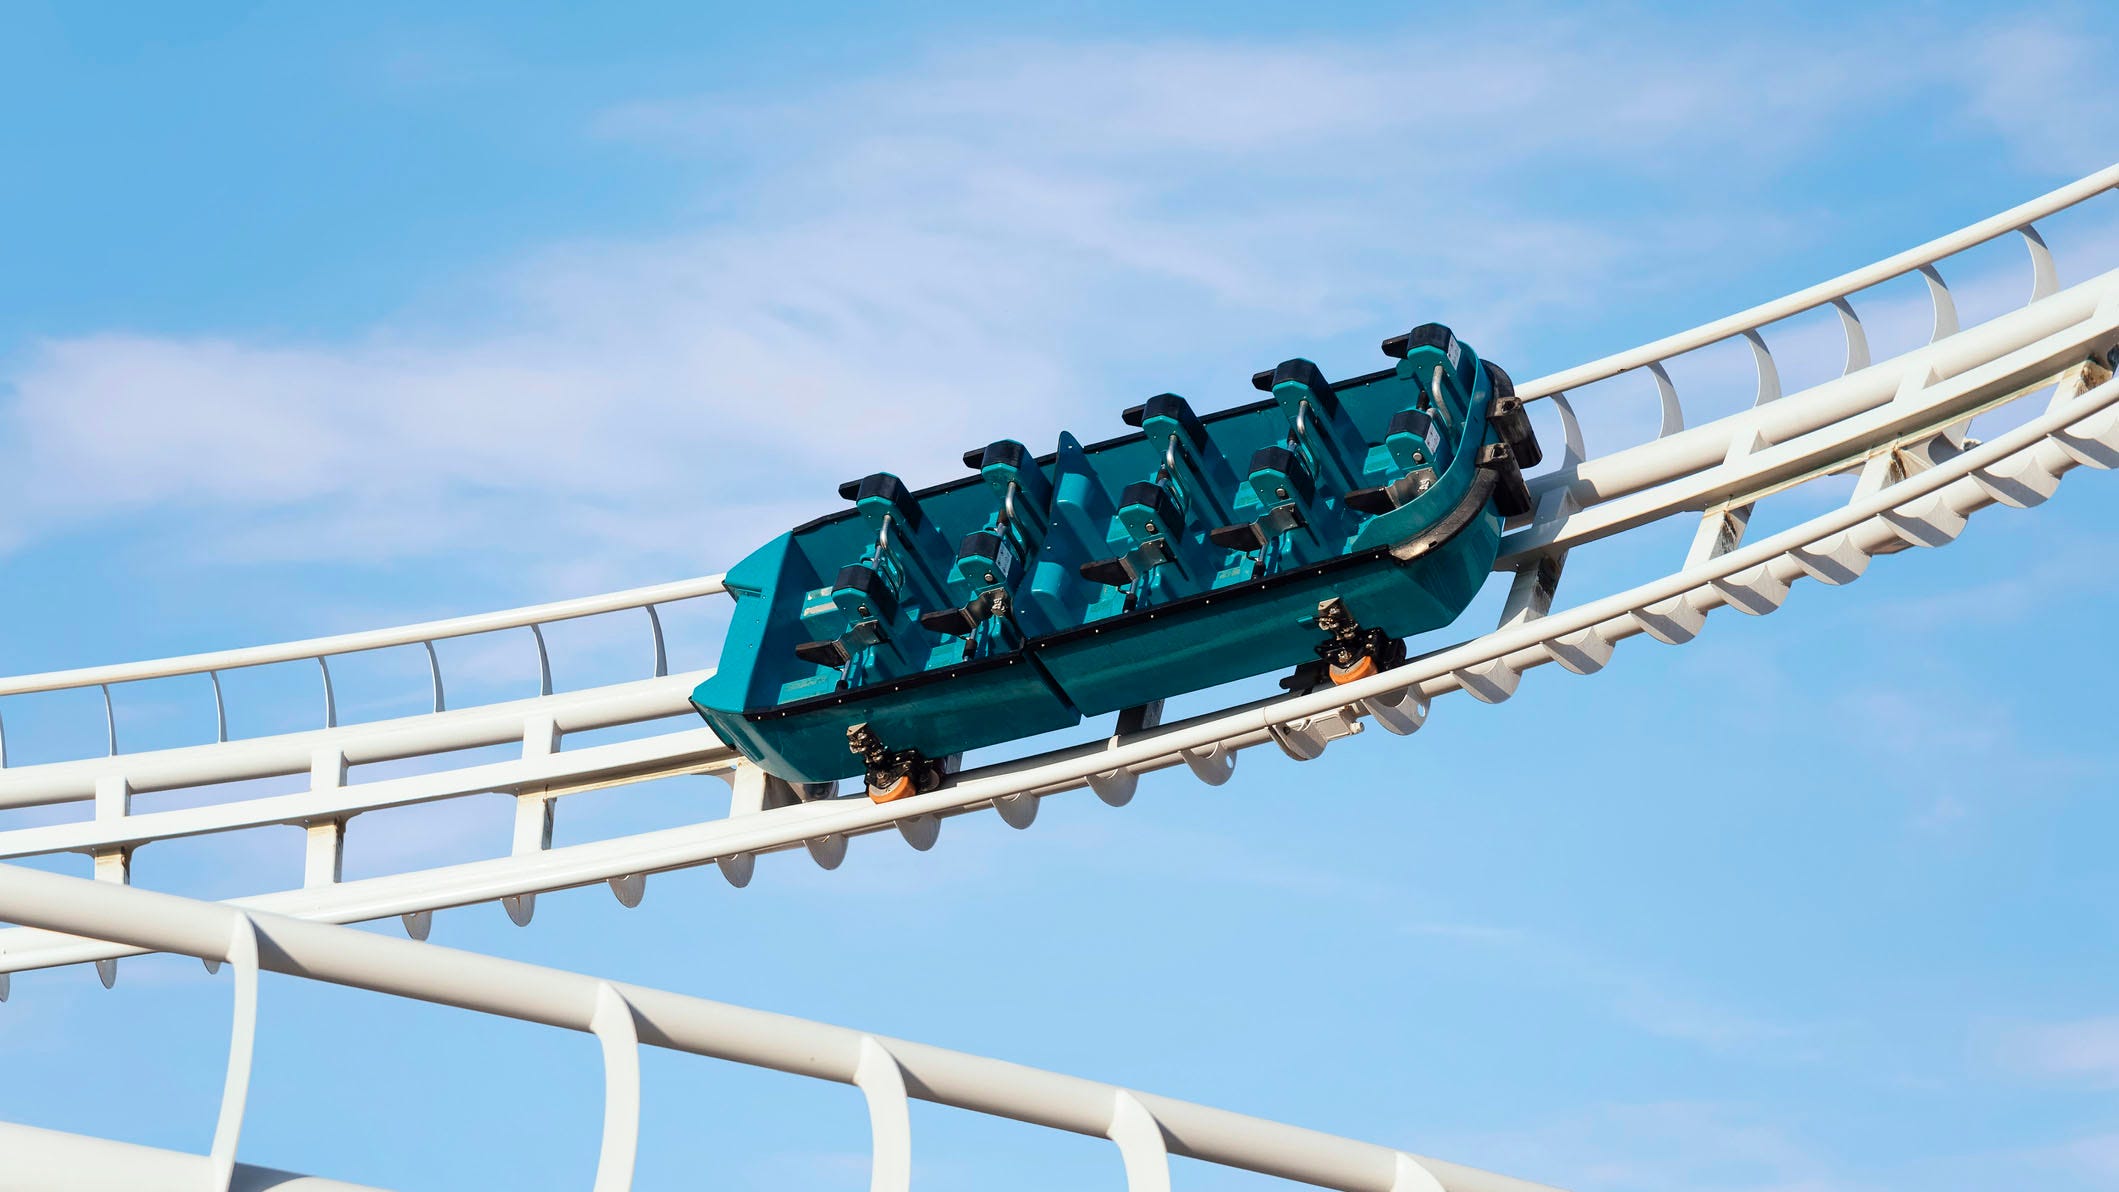 Phoenix roller coaster stalls, prompting rescue of 22 riders: report